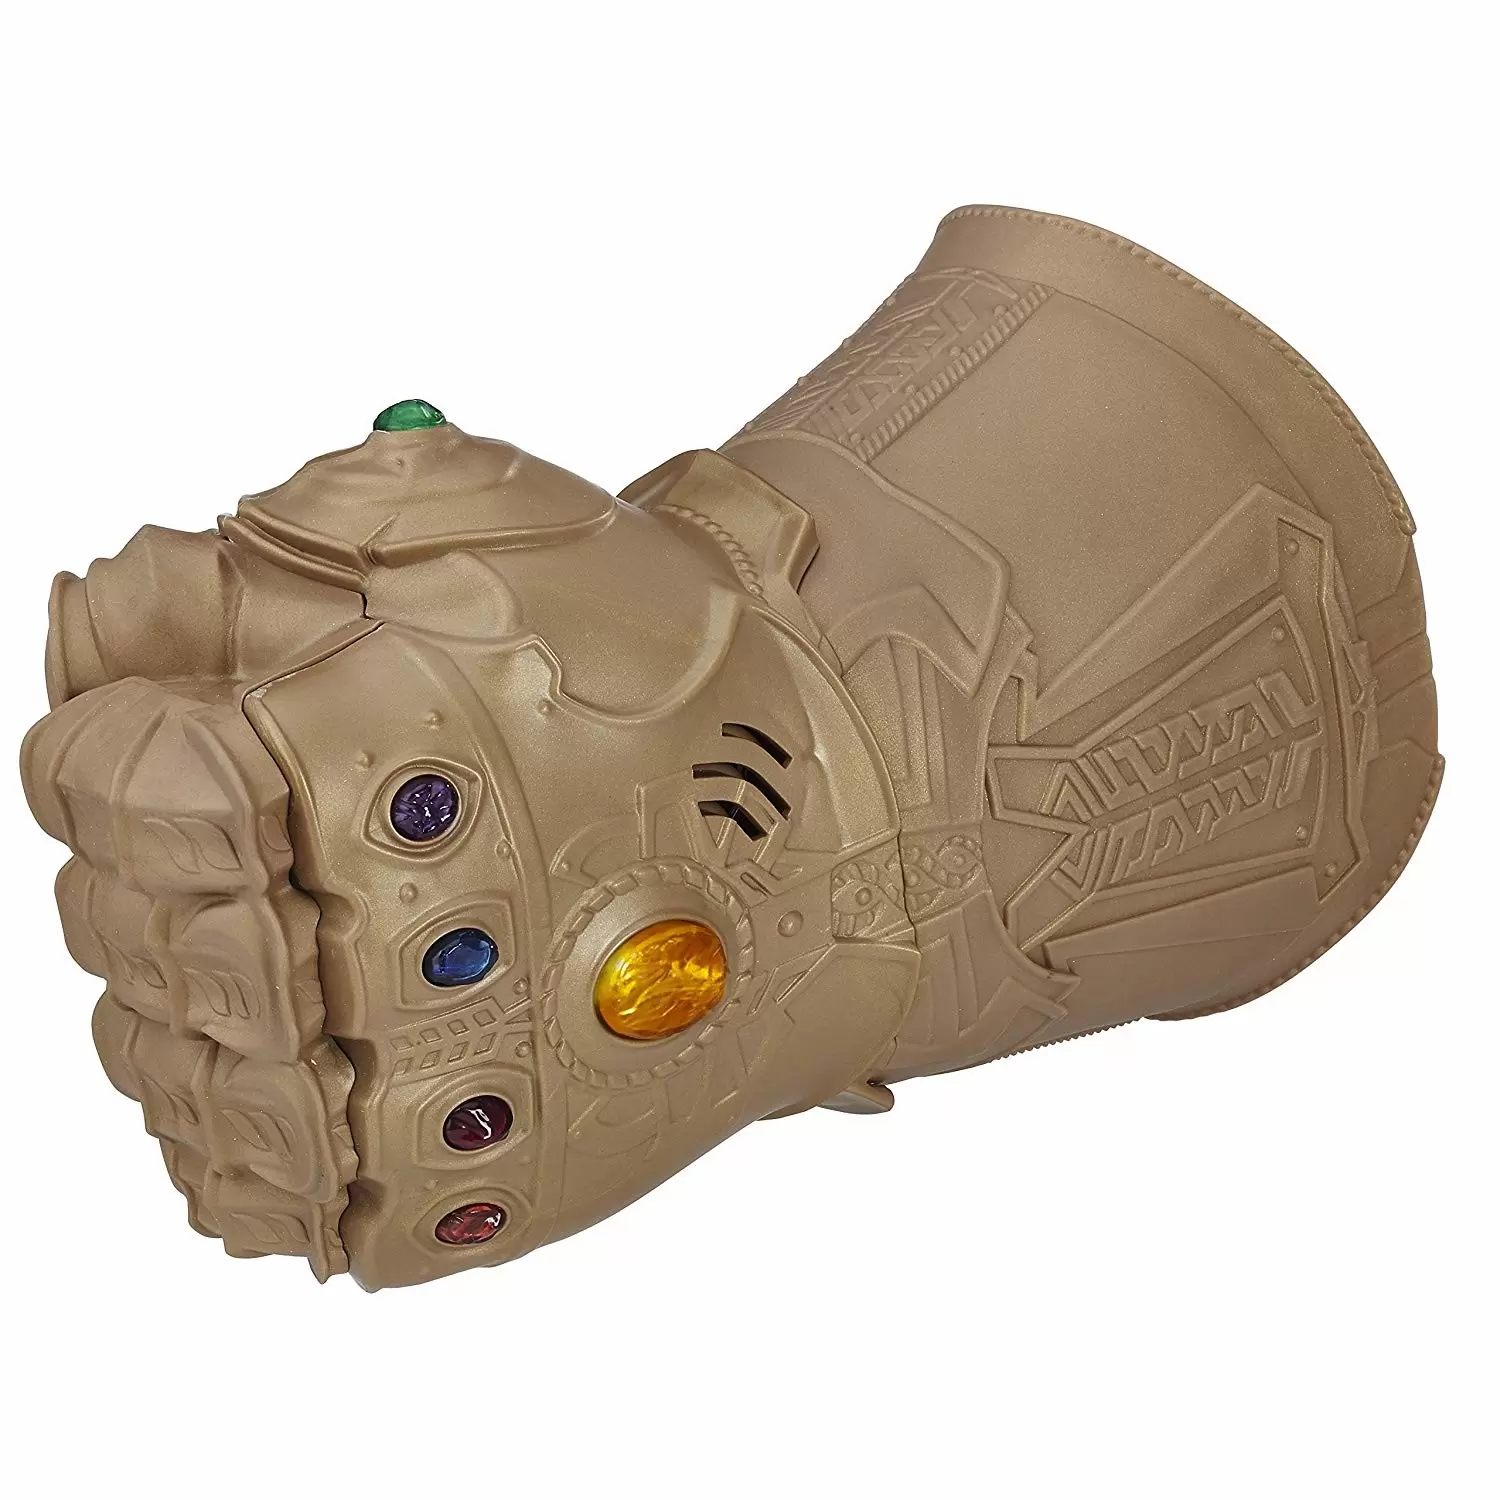 Role Play - Avengers Infinity War - Infinity Gauntlet (Electronic Fist)